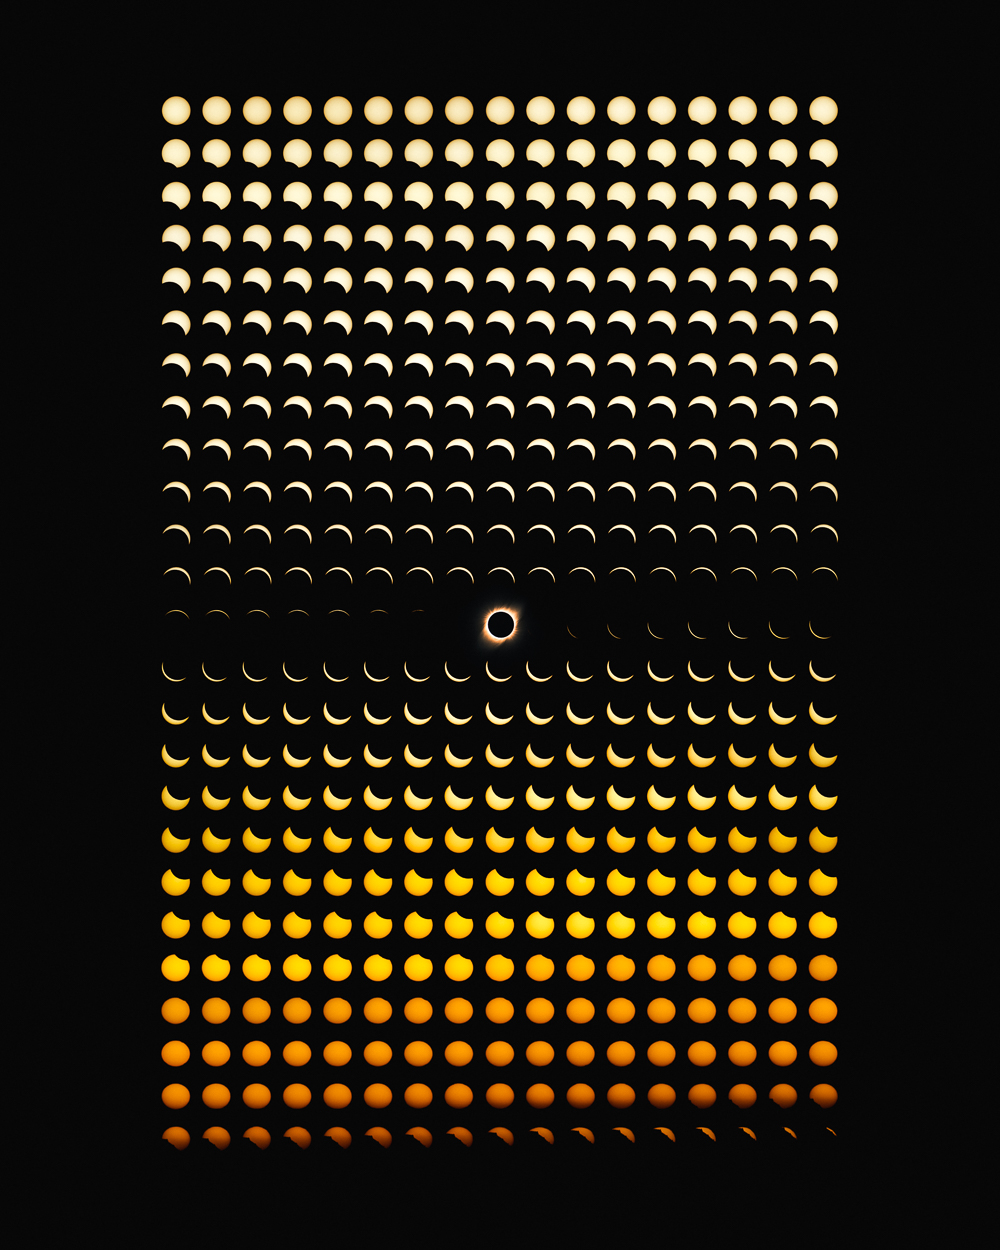 Chart-Like Composite Photographs by Dan Marker-Moore Show the Progression of the 2019 Solar Eclipse